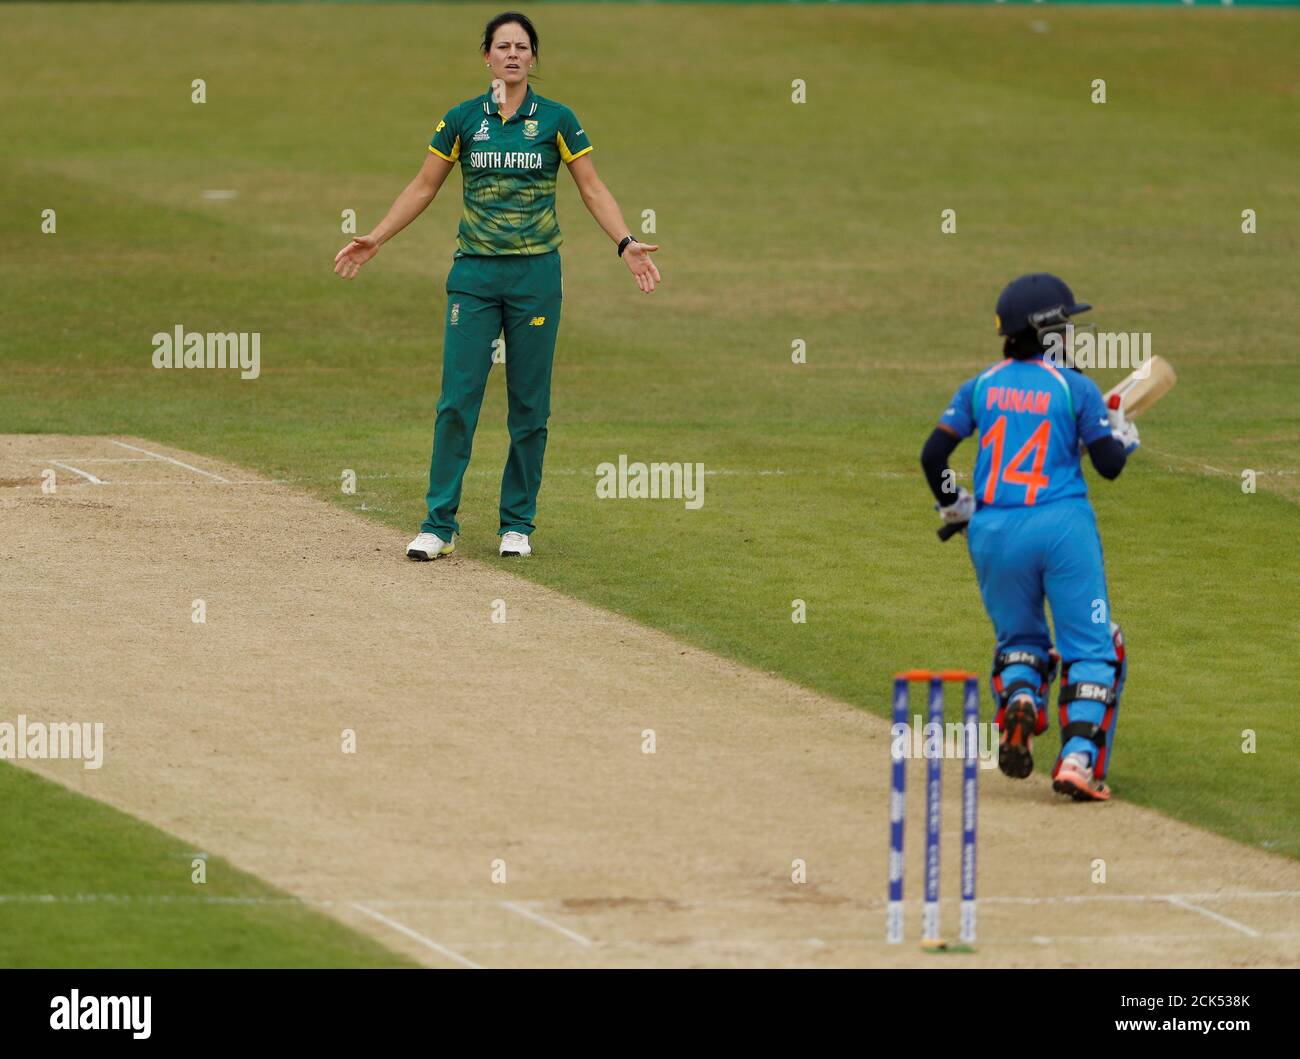 Cricket - South Africa vs India - Women's Cricket World Cup - Leicester, Britain - July 8, 2017   South Africa's Marizanne Kapp reacts to missed chance to dismiss India's Punam Raut   Action Images via Reuters/Lee Smith Stock Photo